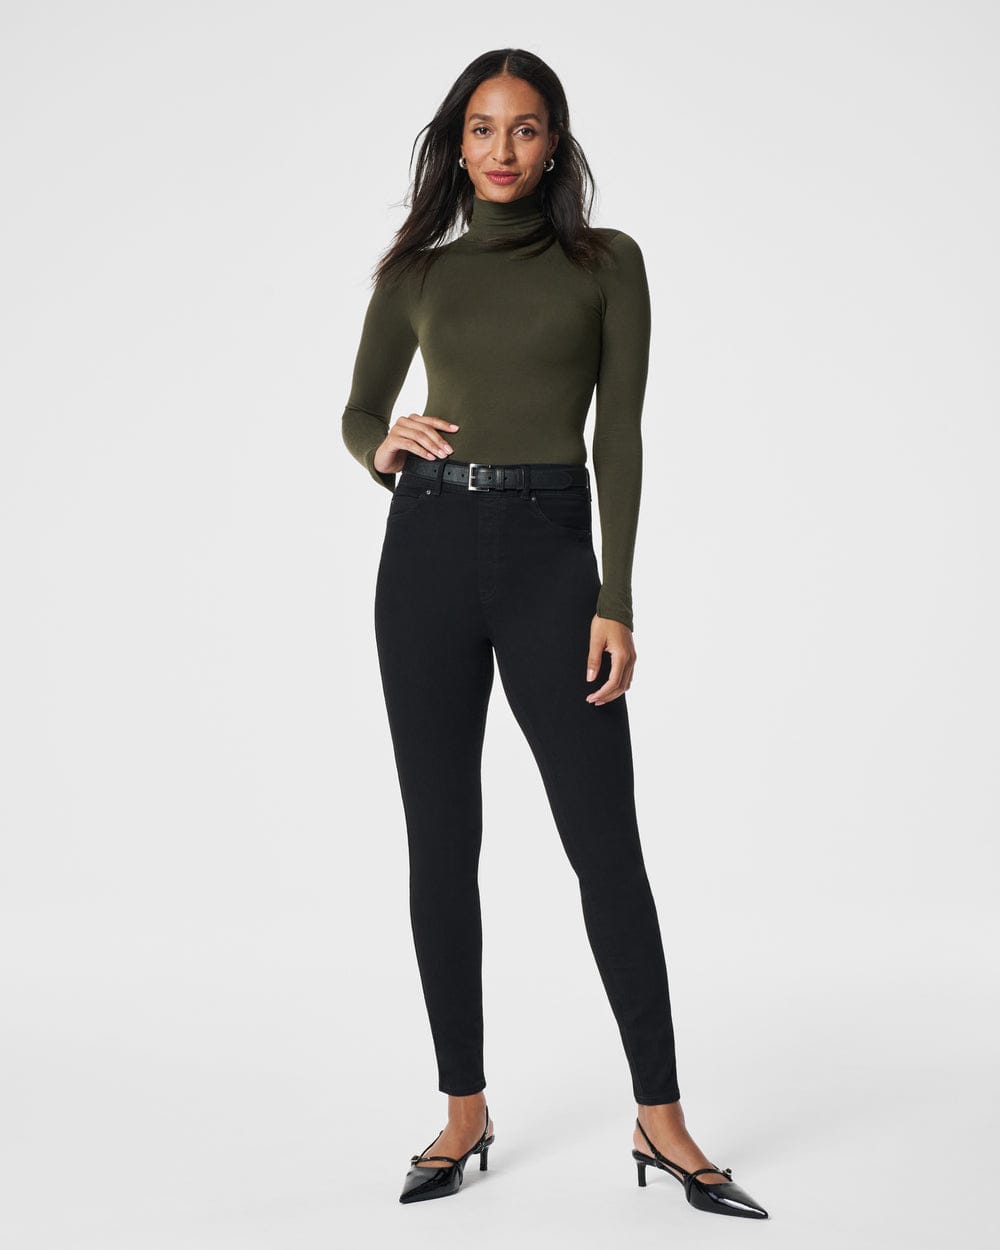 Spanx Cyber Monday 2022 sale extended: 20% off everything